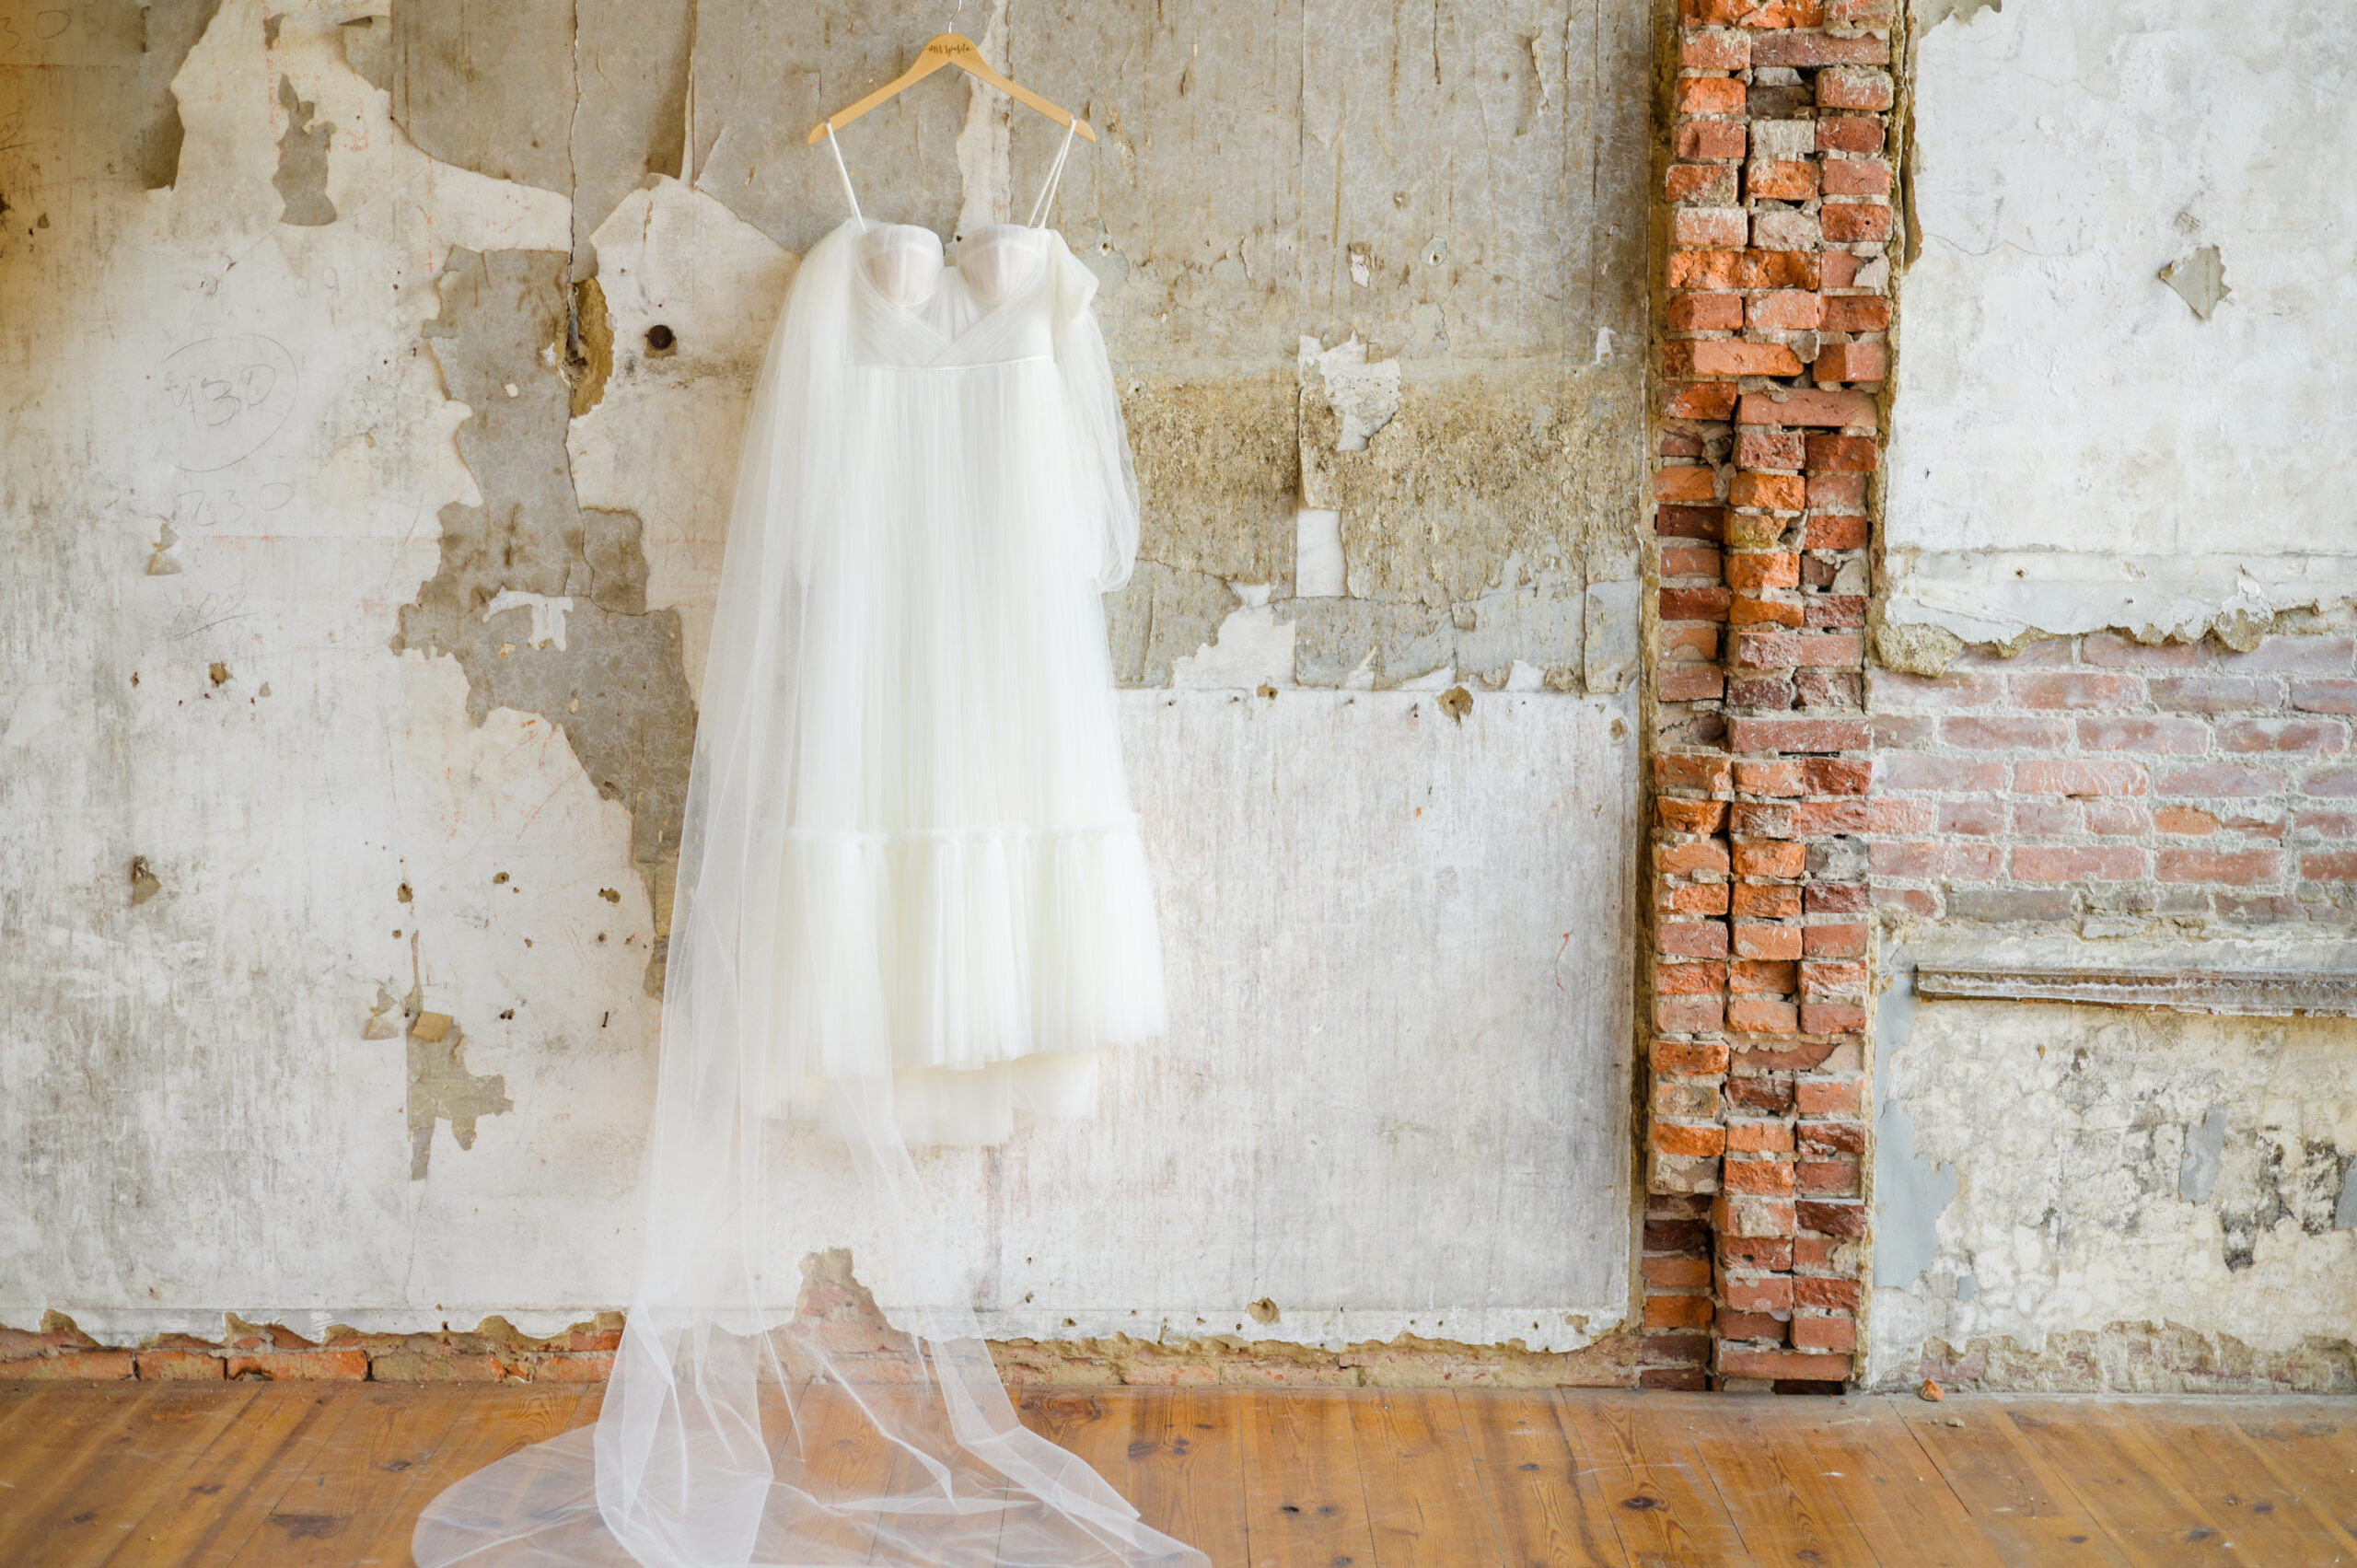 How to select the perfect wedding dress from my favorite dress shops and boutiques in Maryland!